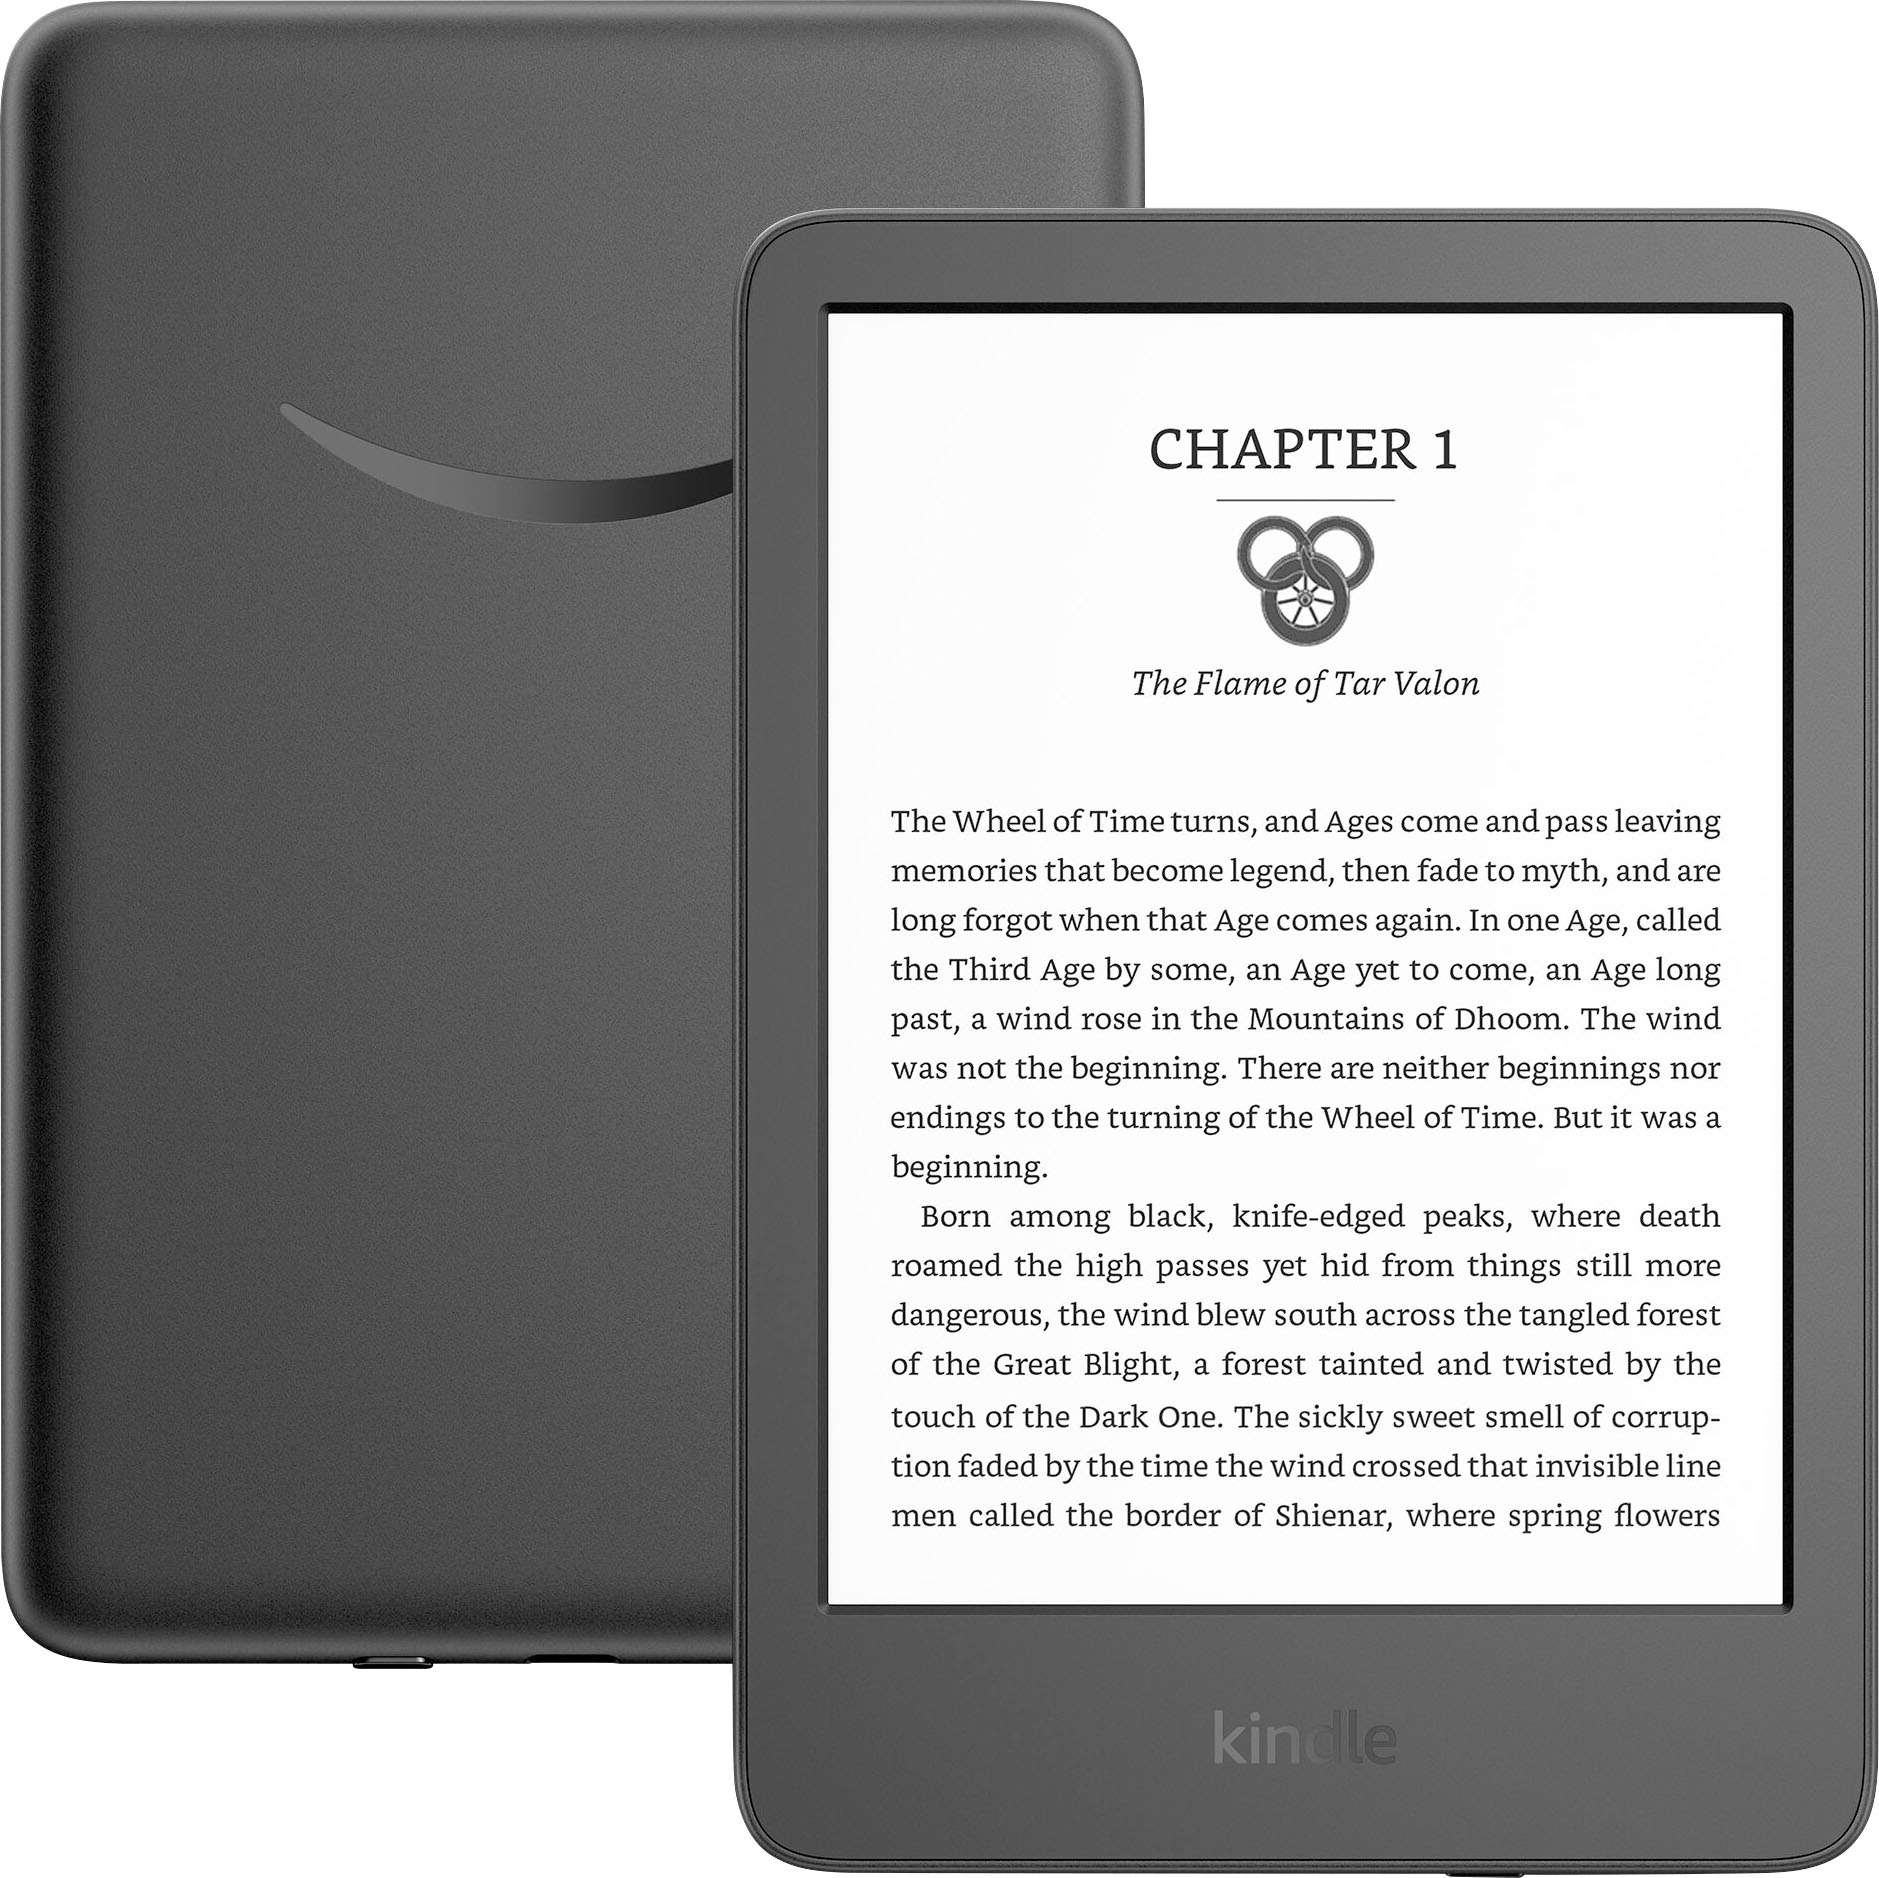 E-book gifts made easy for Kindle, not other e-readers 